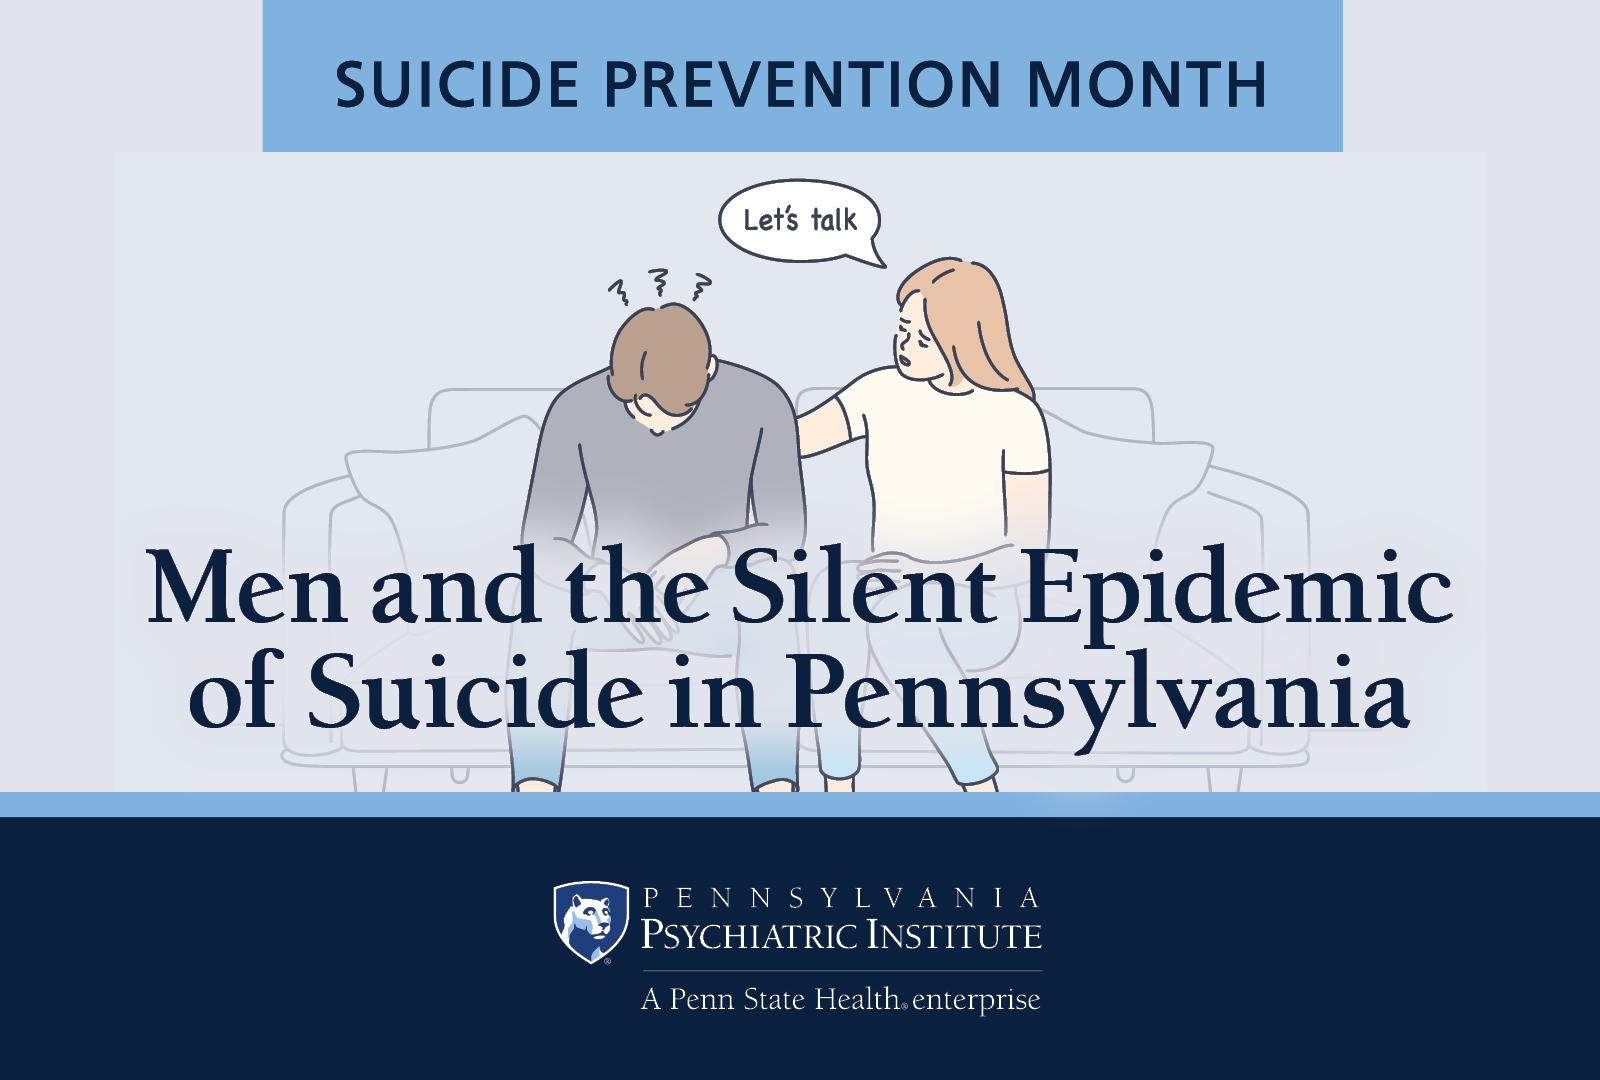 Men and the Silent Epidemic of Suicide in Pennsylvania